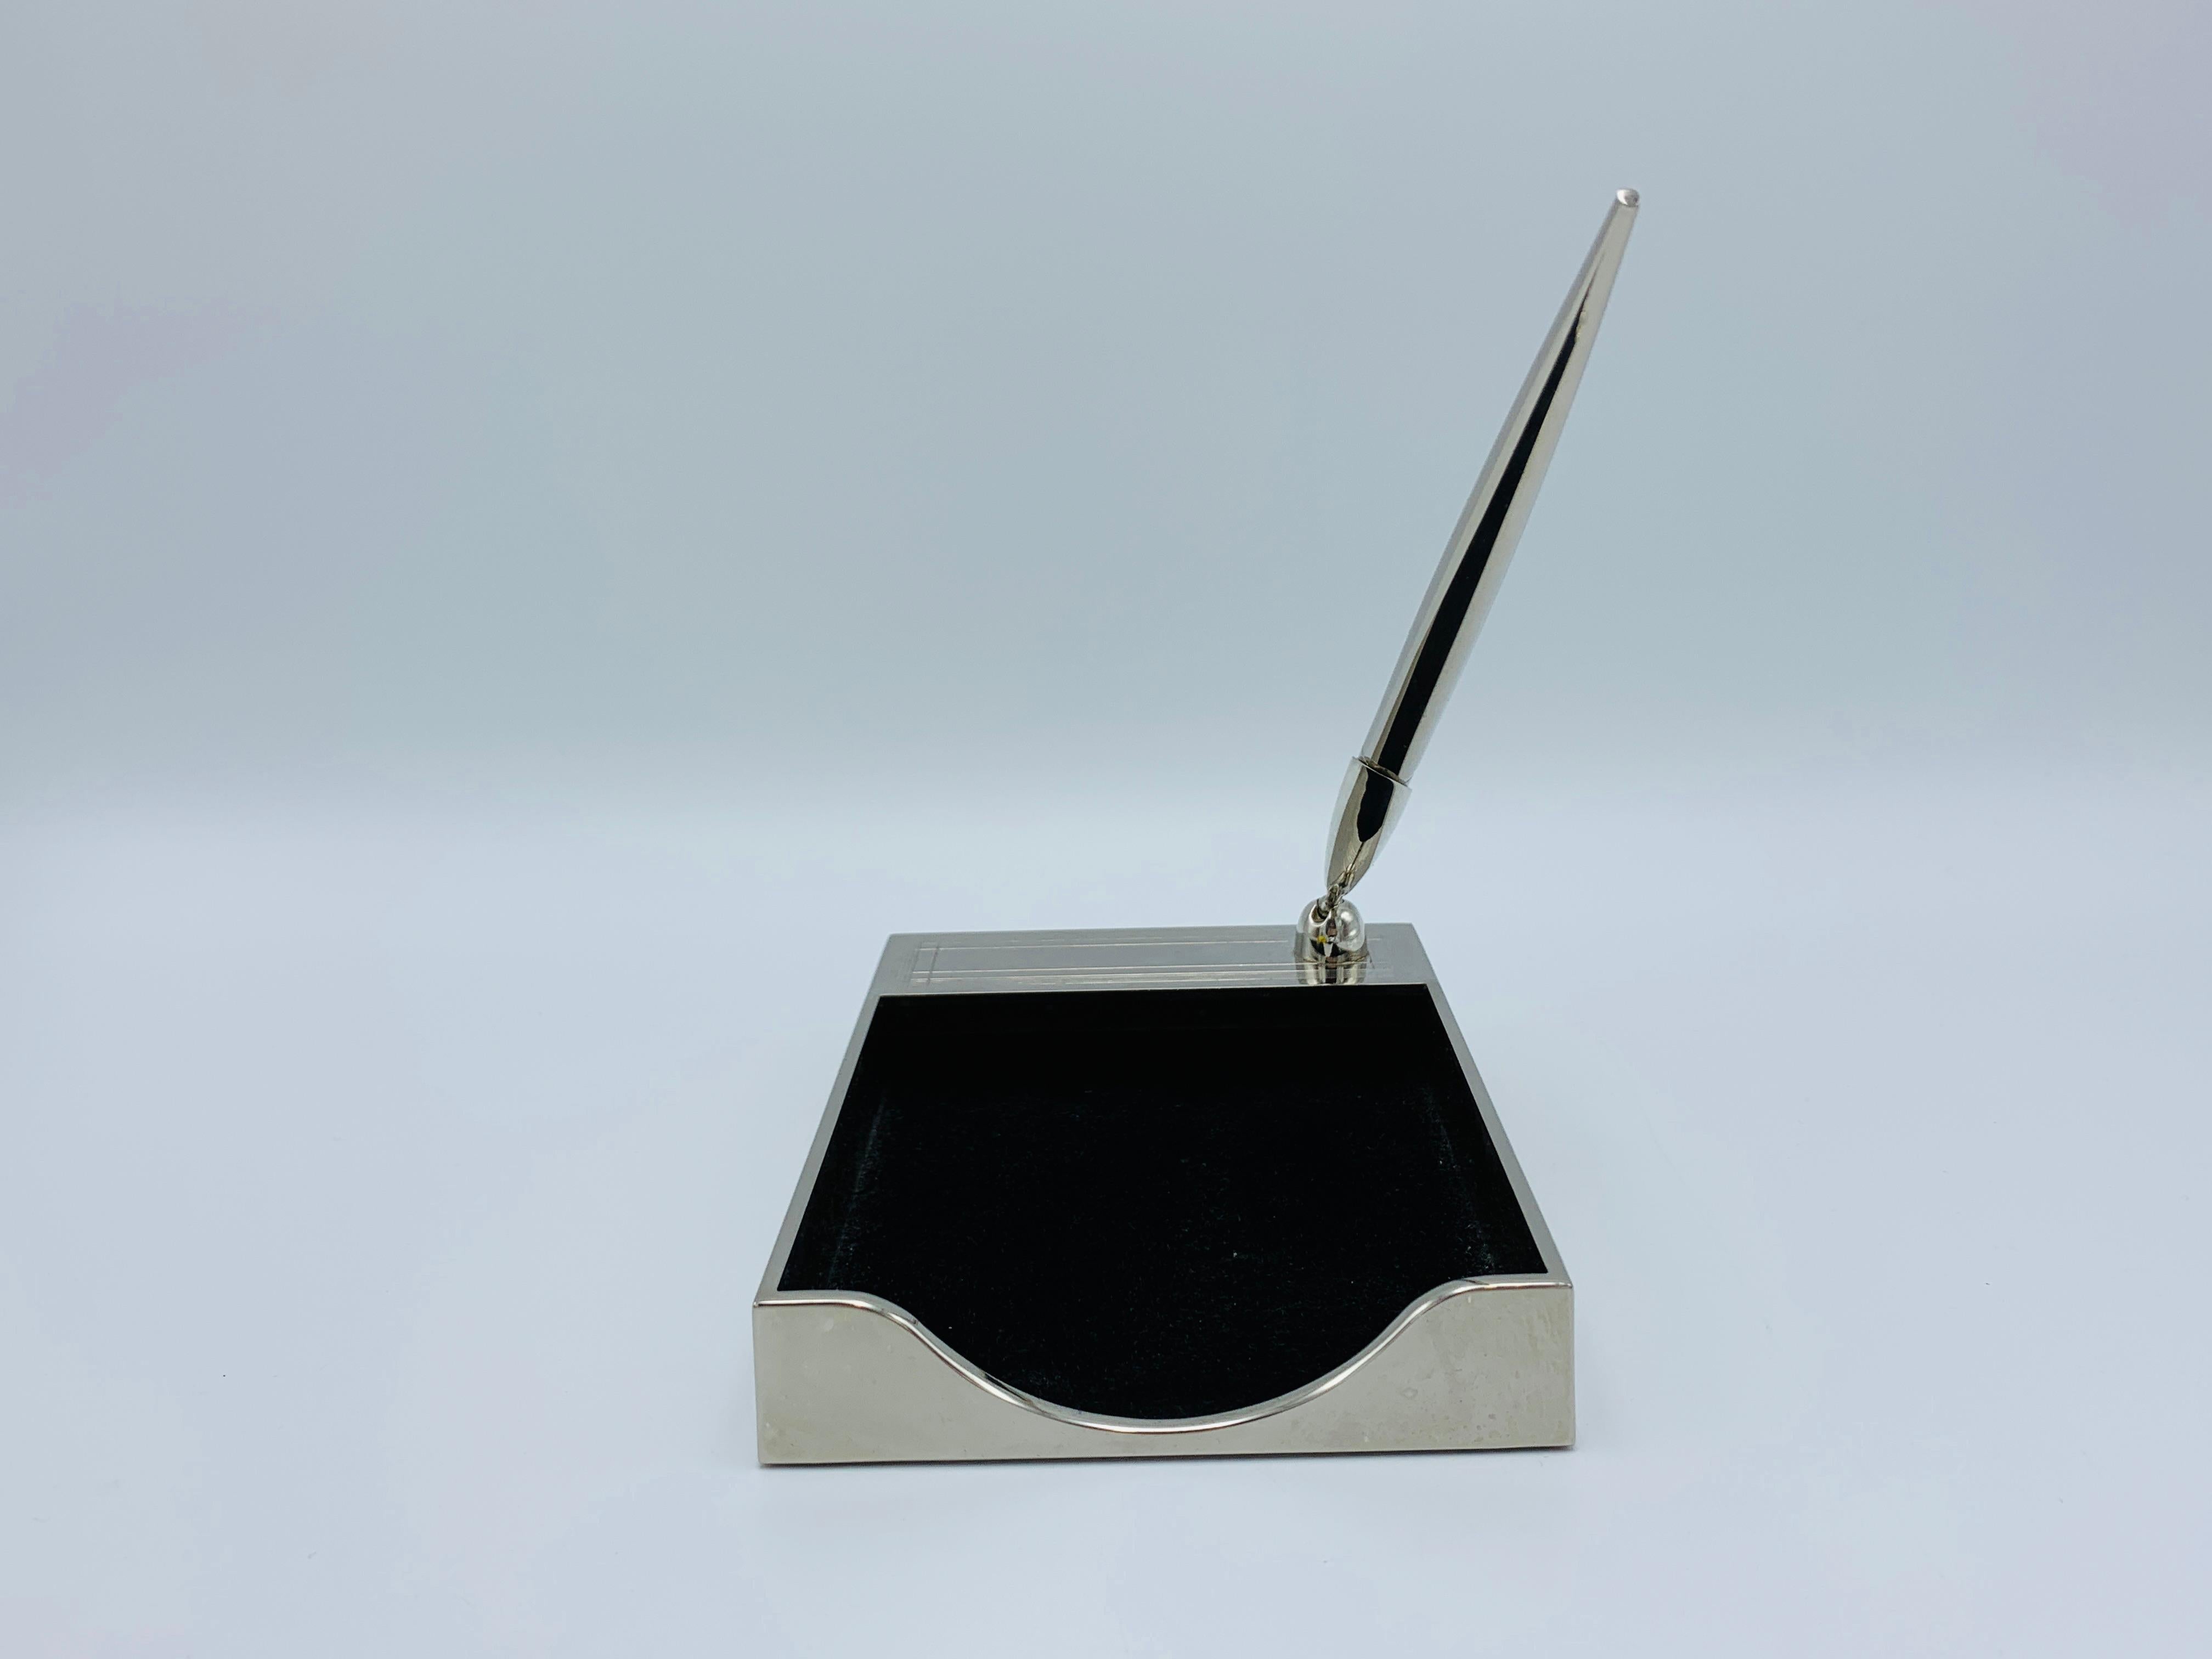 Listed is a stunning, 1960s Italian silver-plate stationary notepad and pen desk set. The piece includes a notepad holder with an attached adjustable pen holder, and matching pen. The piece can hold a standard 4